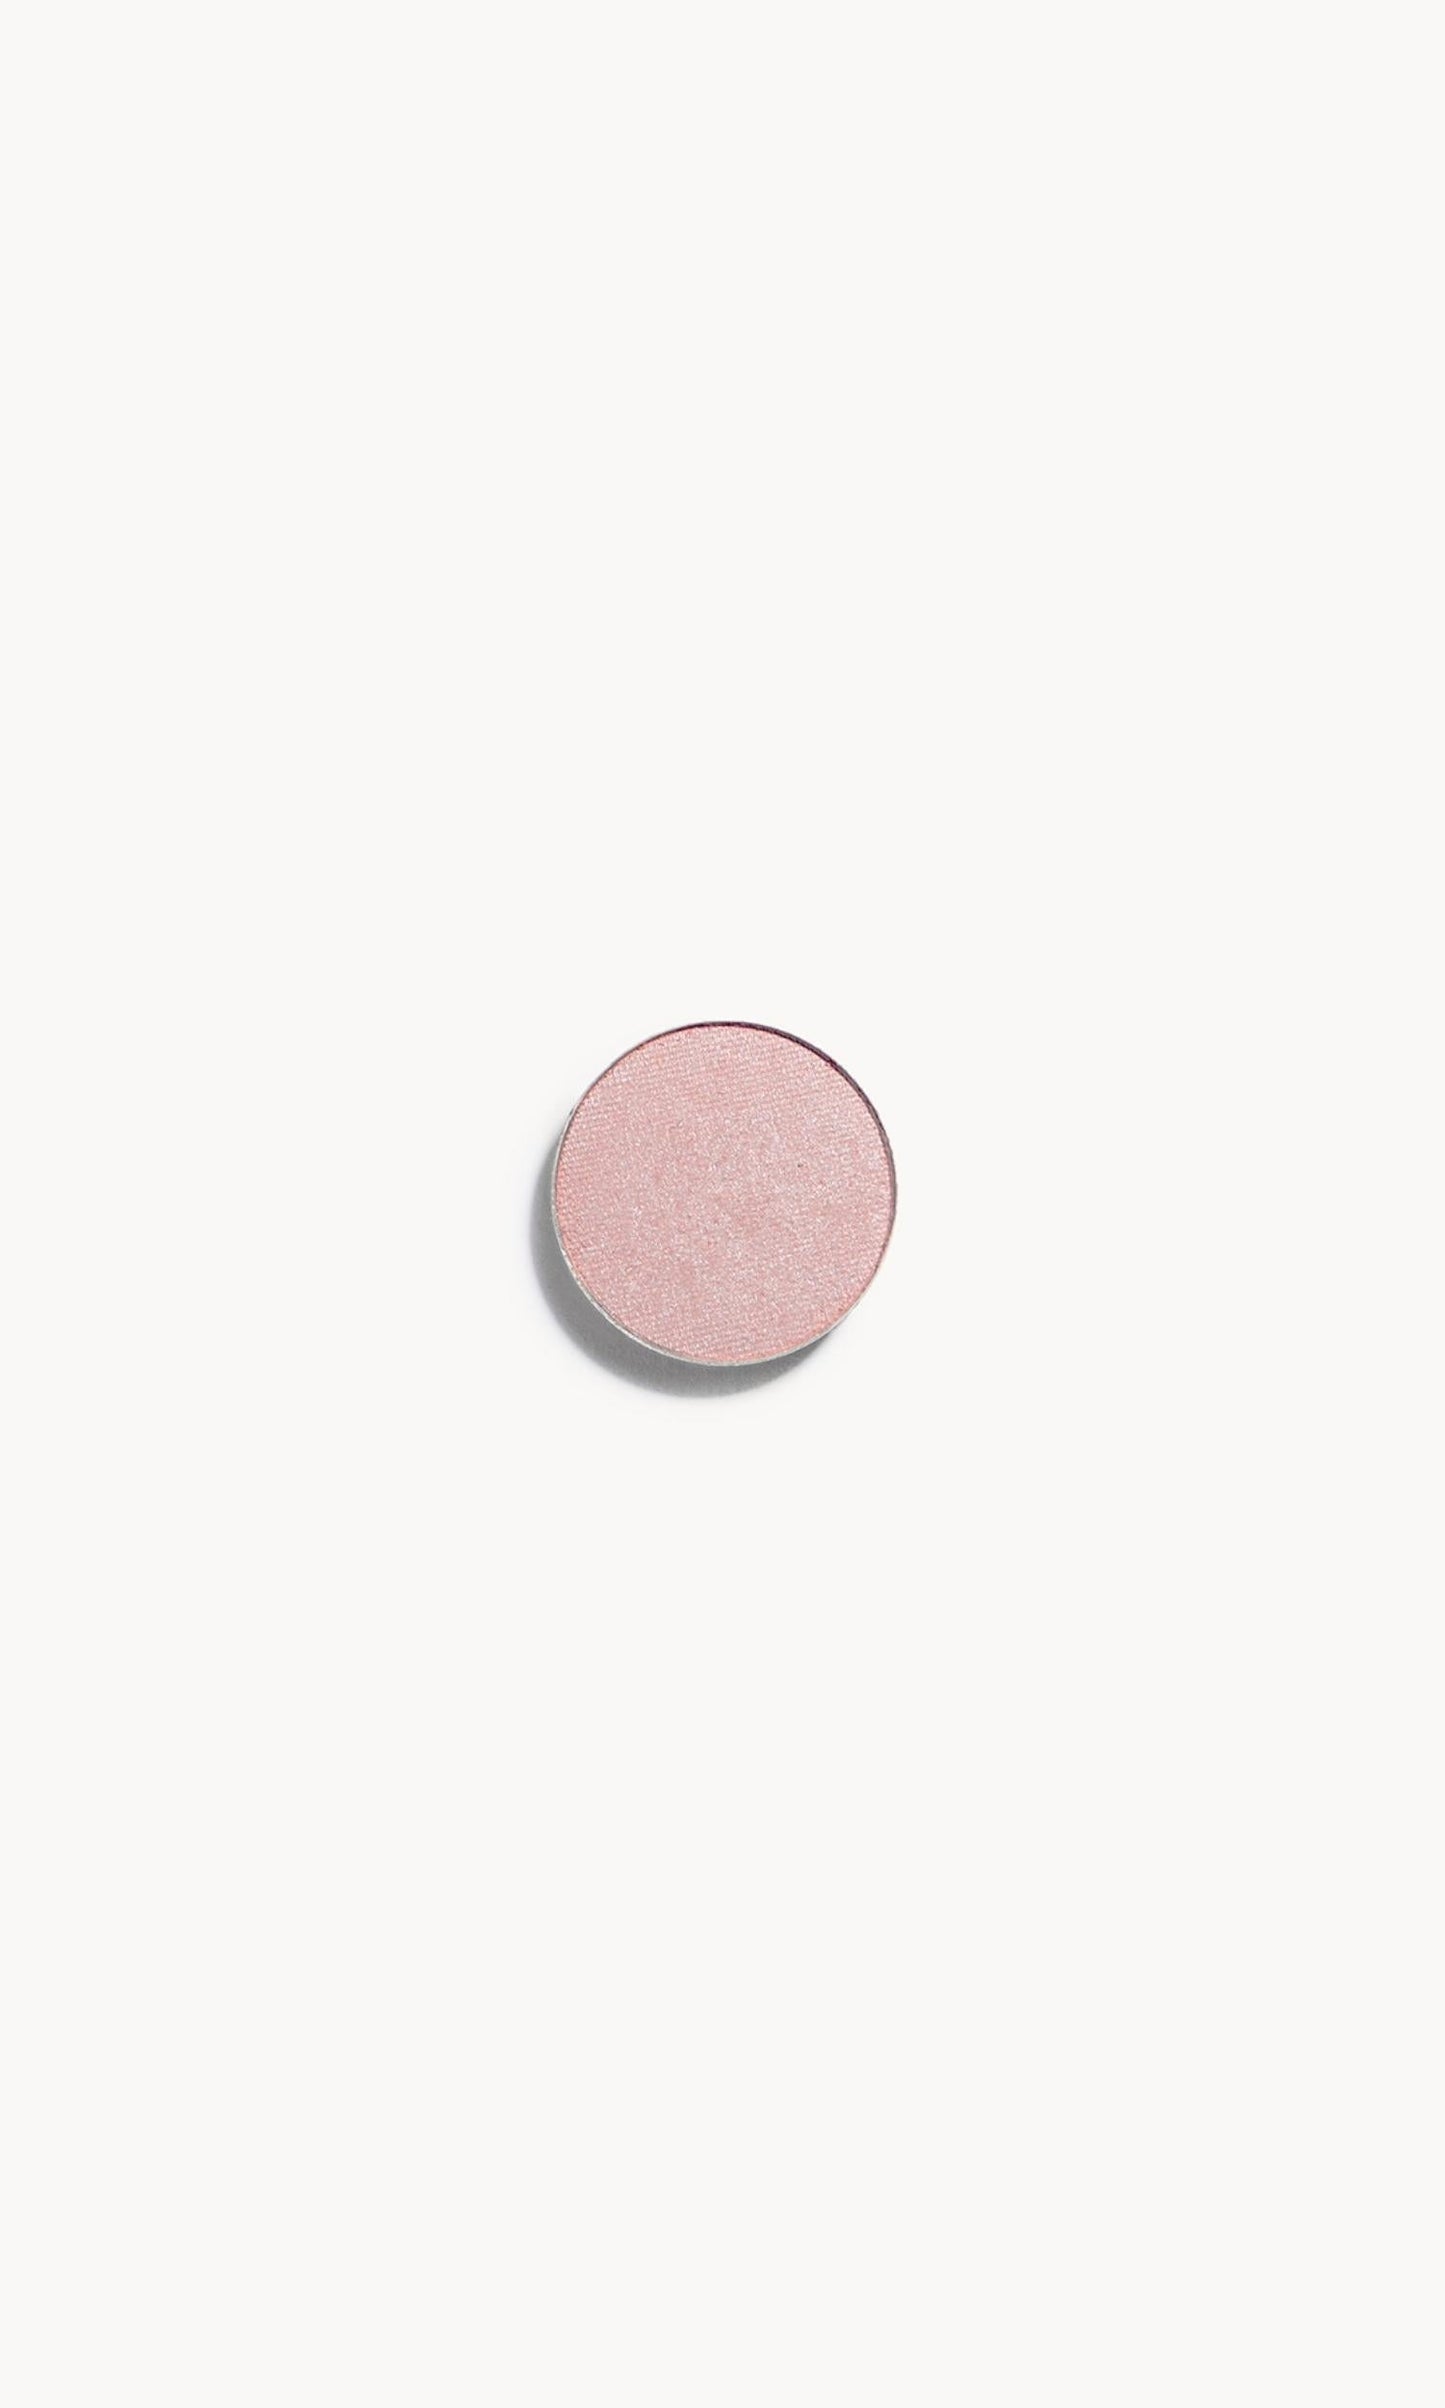 A circle of light pink eye shadow on a white background